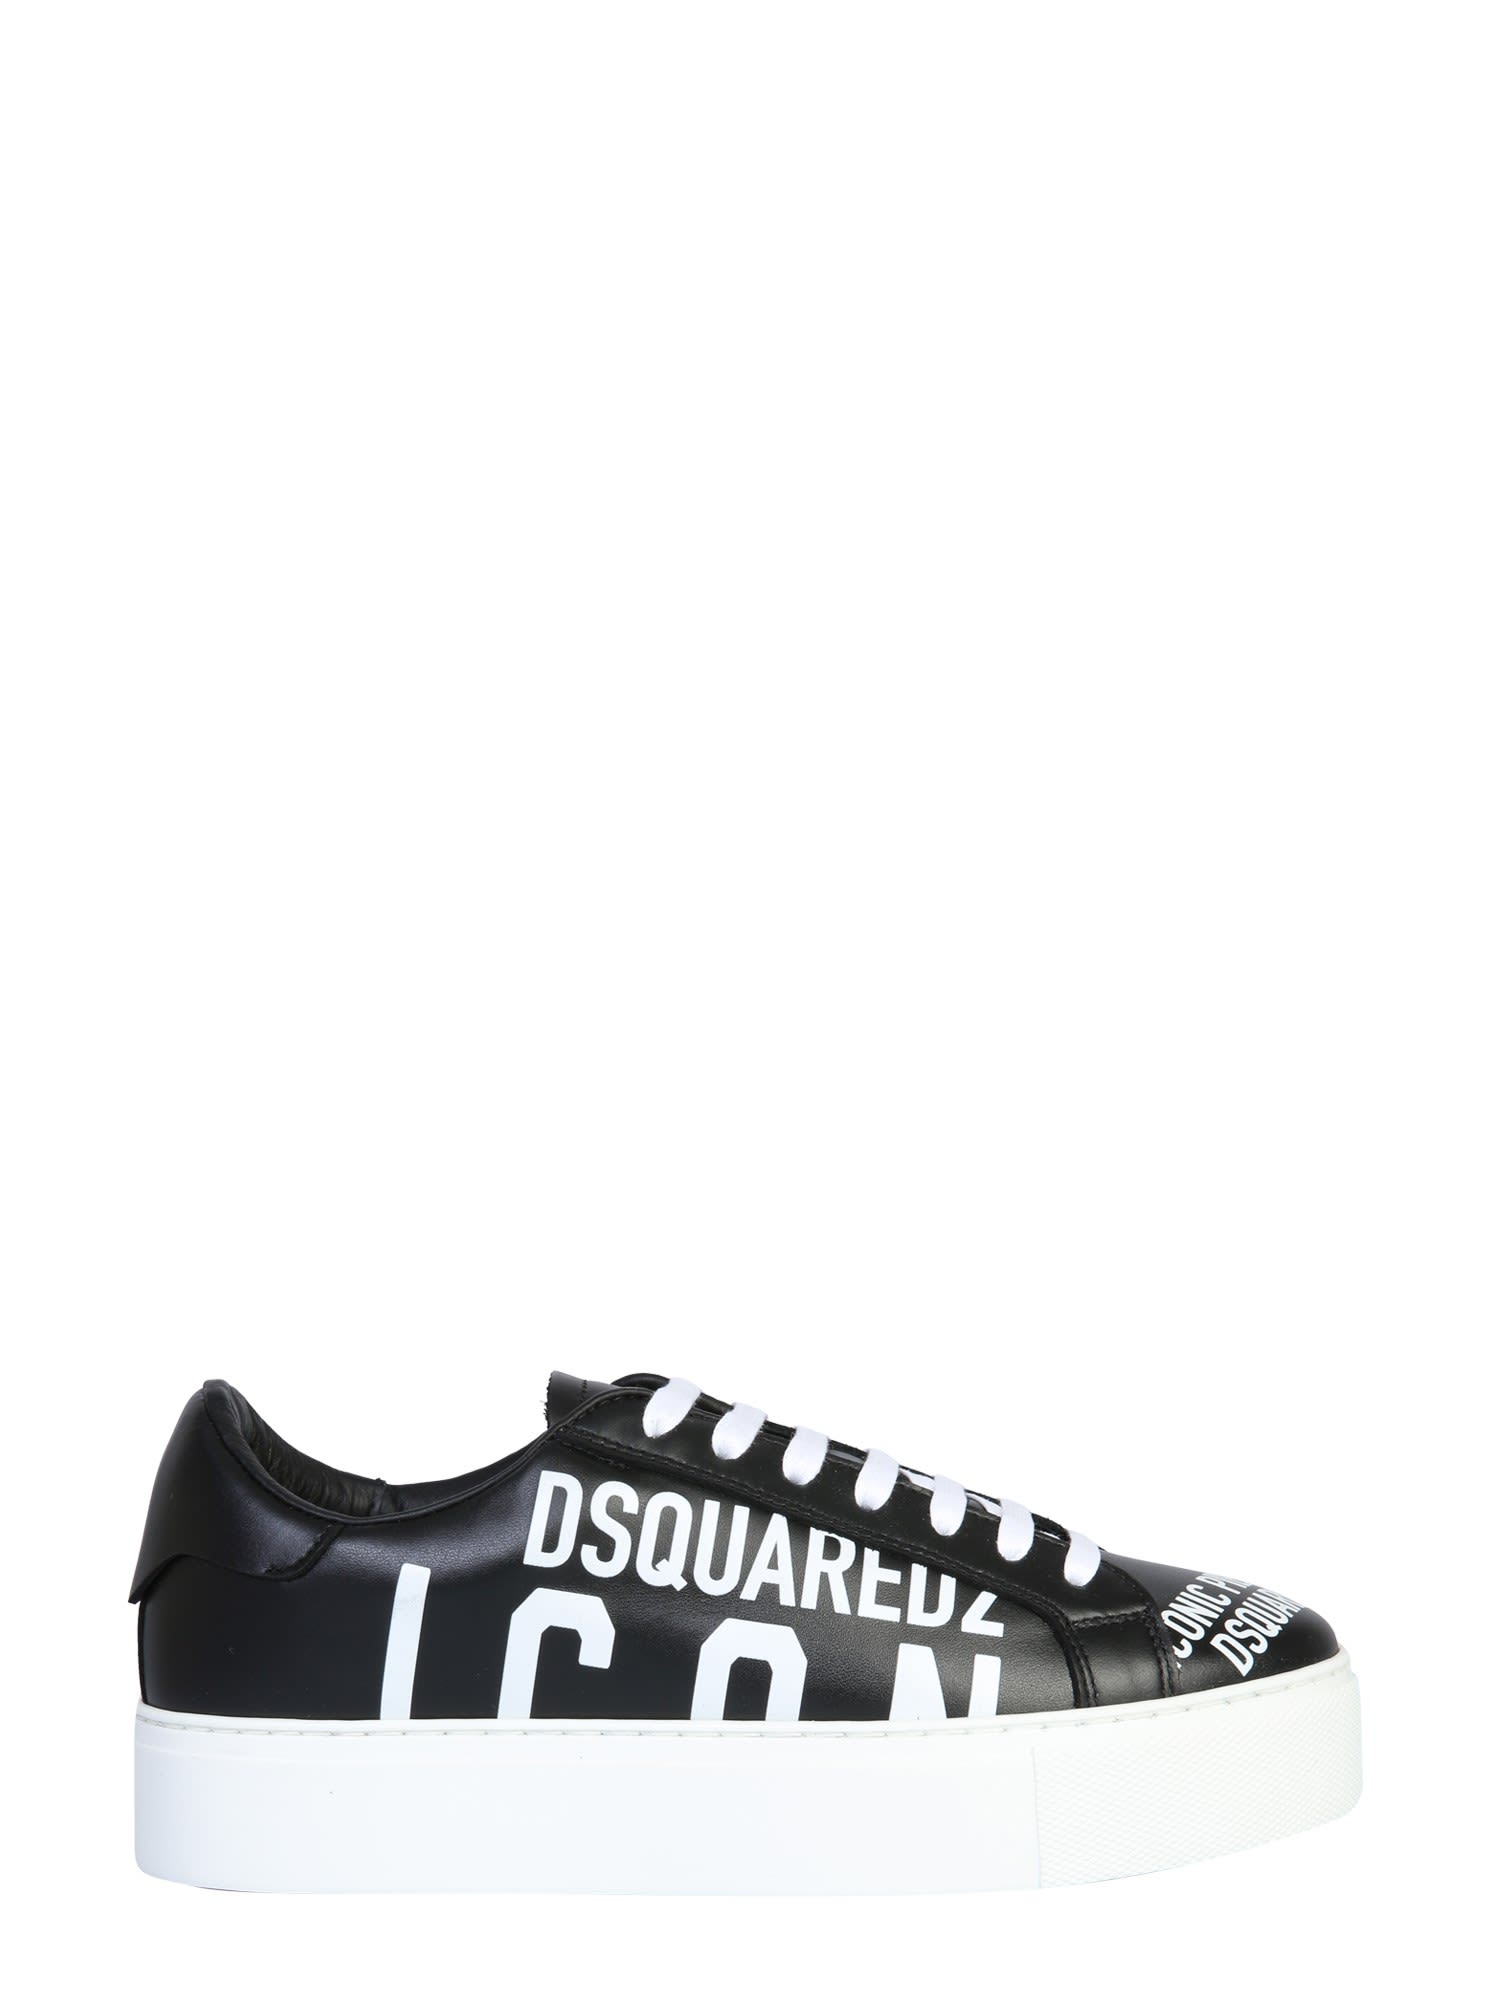 DSQUARED2 SNEAKER WITH LOGO,11238428